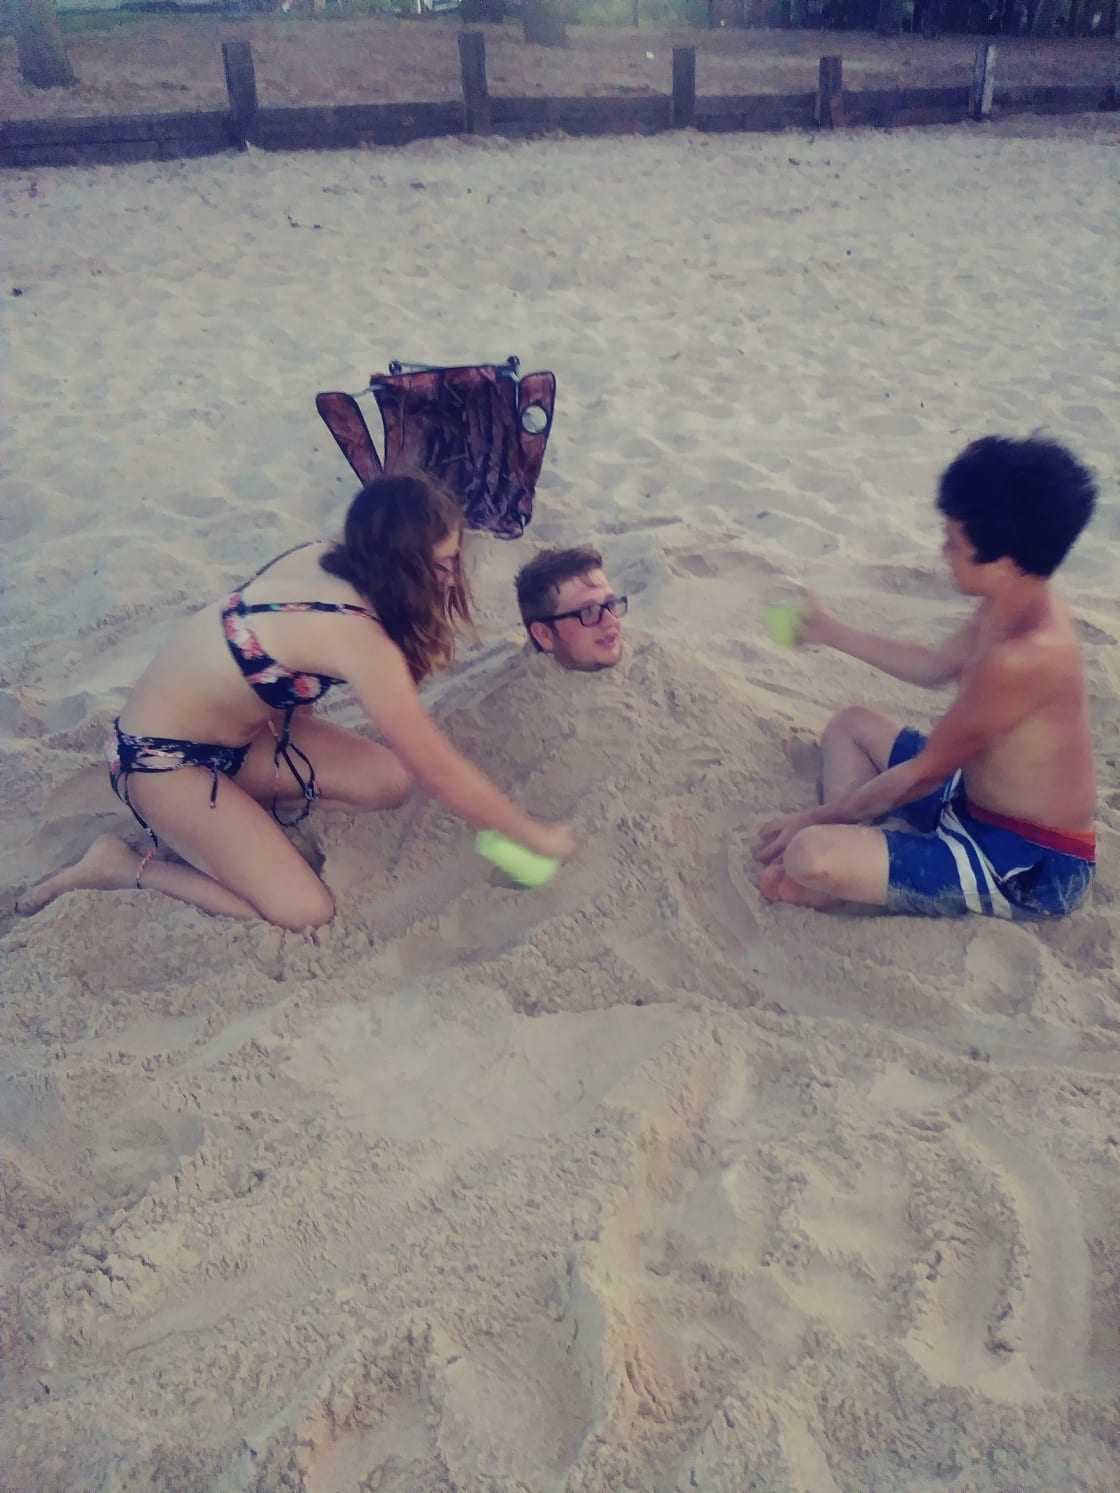 The best part about sand is getting to bury your big brother